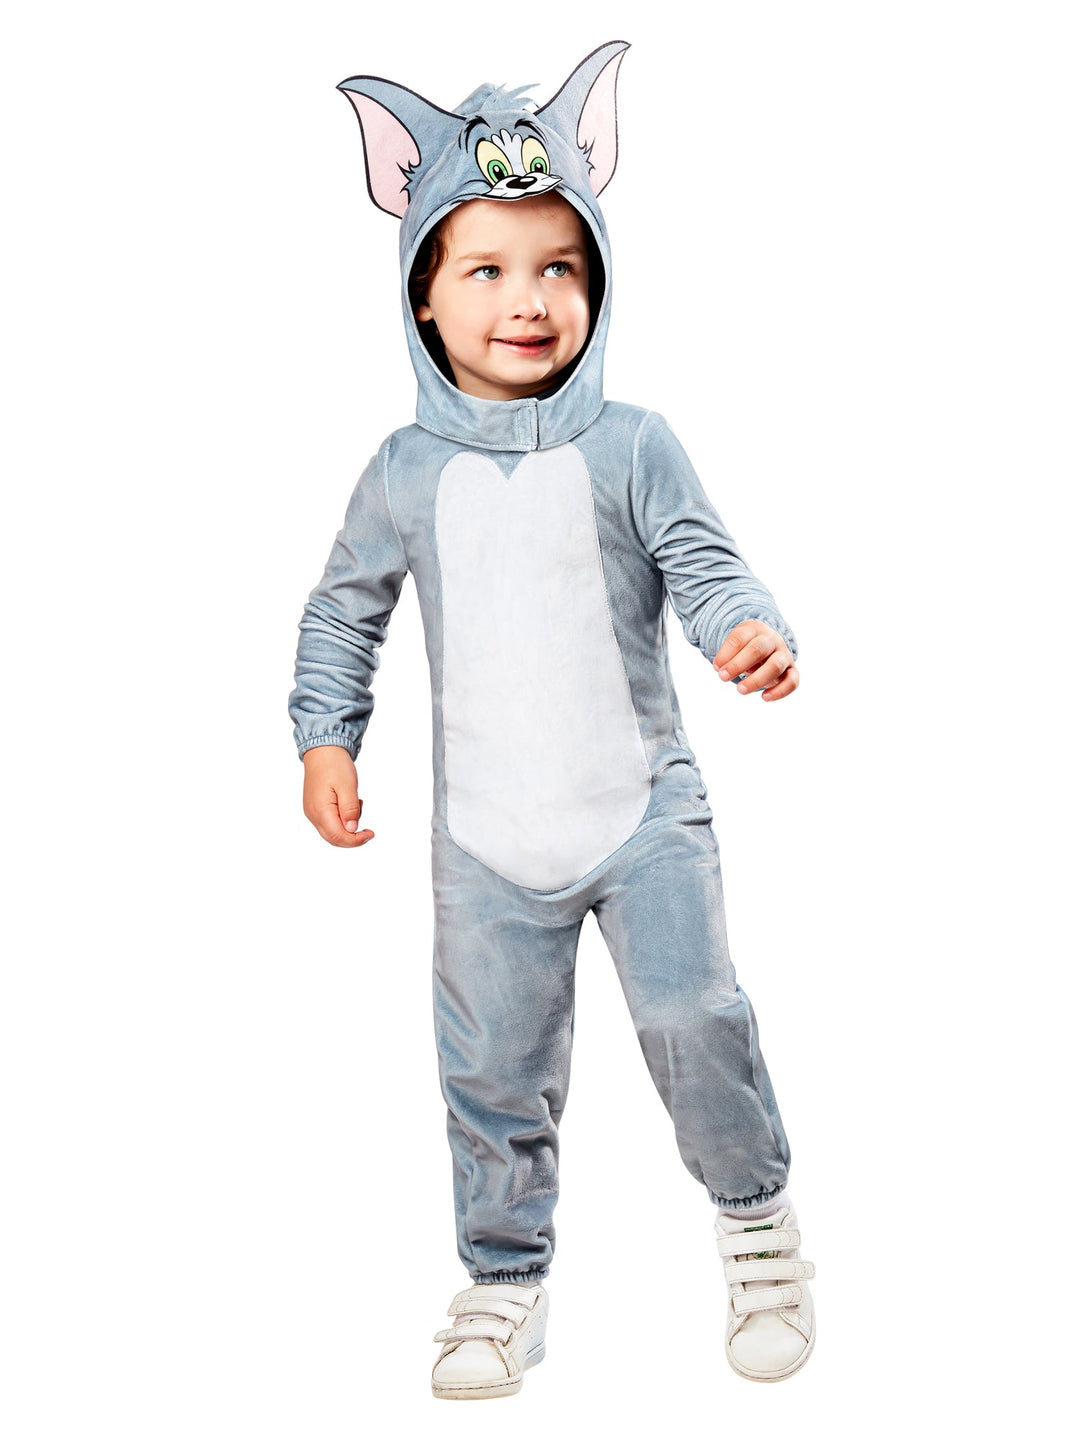 Tom Costume Toddler Tom and Jerry